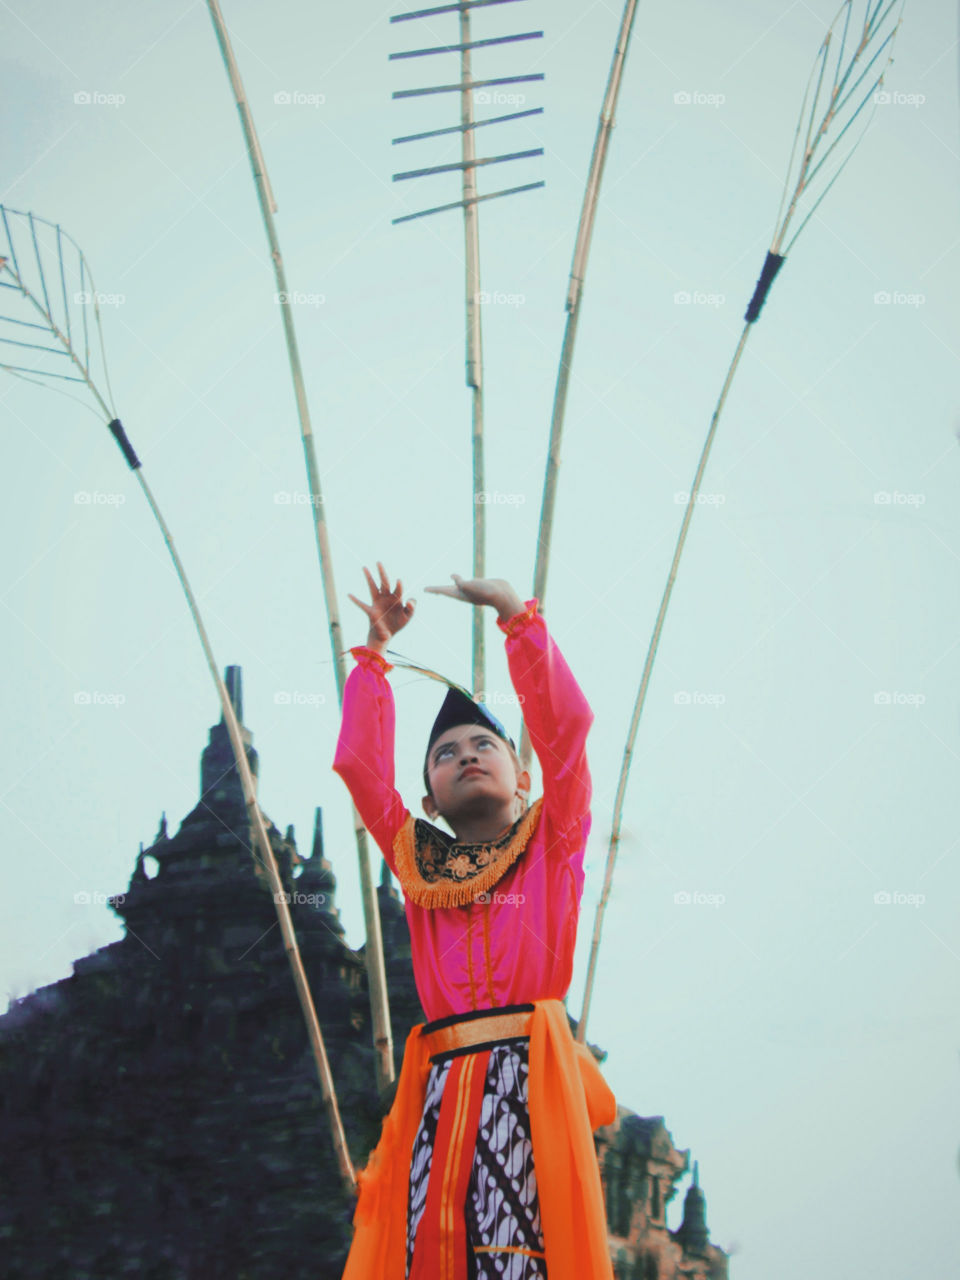 "Ngarojeng Dance Maneuver"

The Ngarojeng dance was adapted from the Ajeng music, which is a musical harbor that developed in the edge of the Betawi region. This dance usually used to accompany the Betawi bridal ceremony.